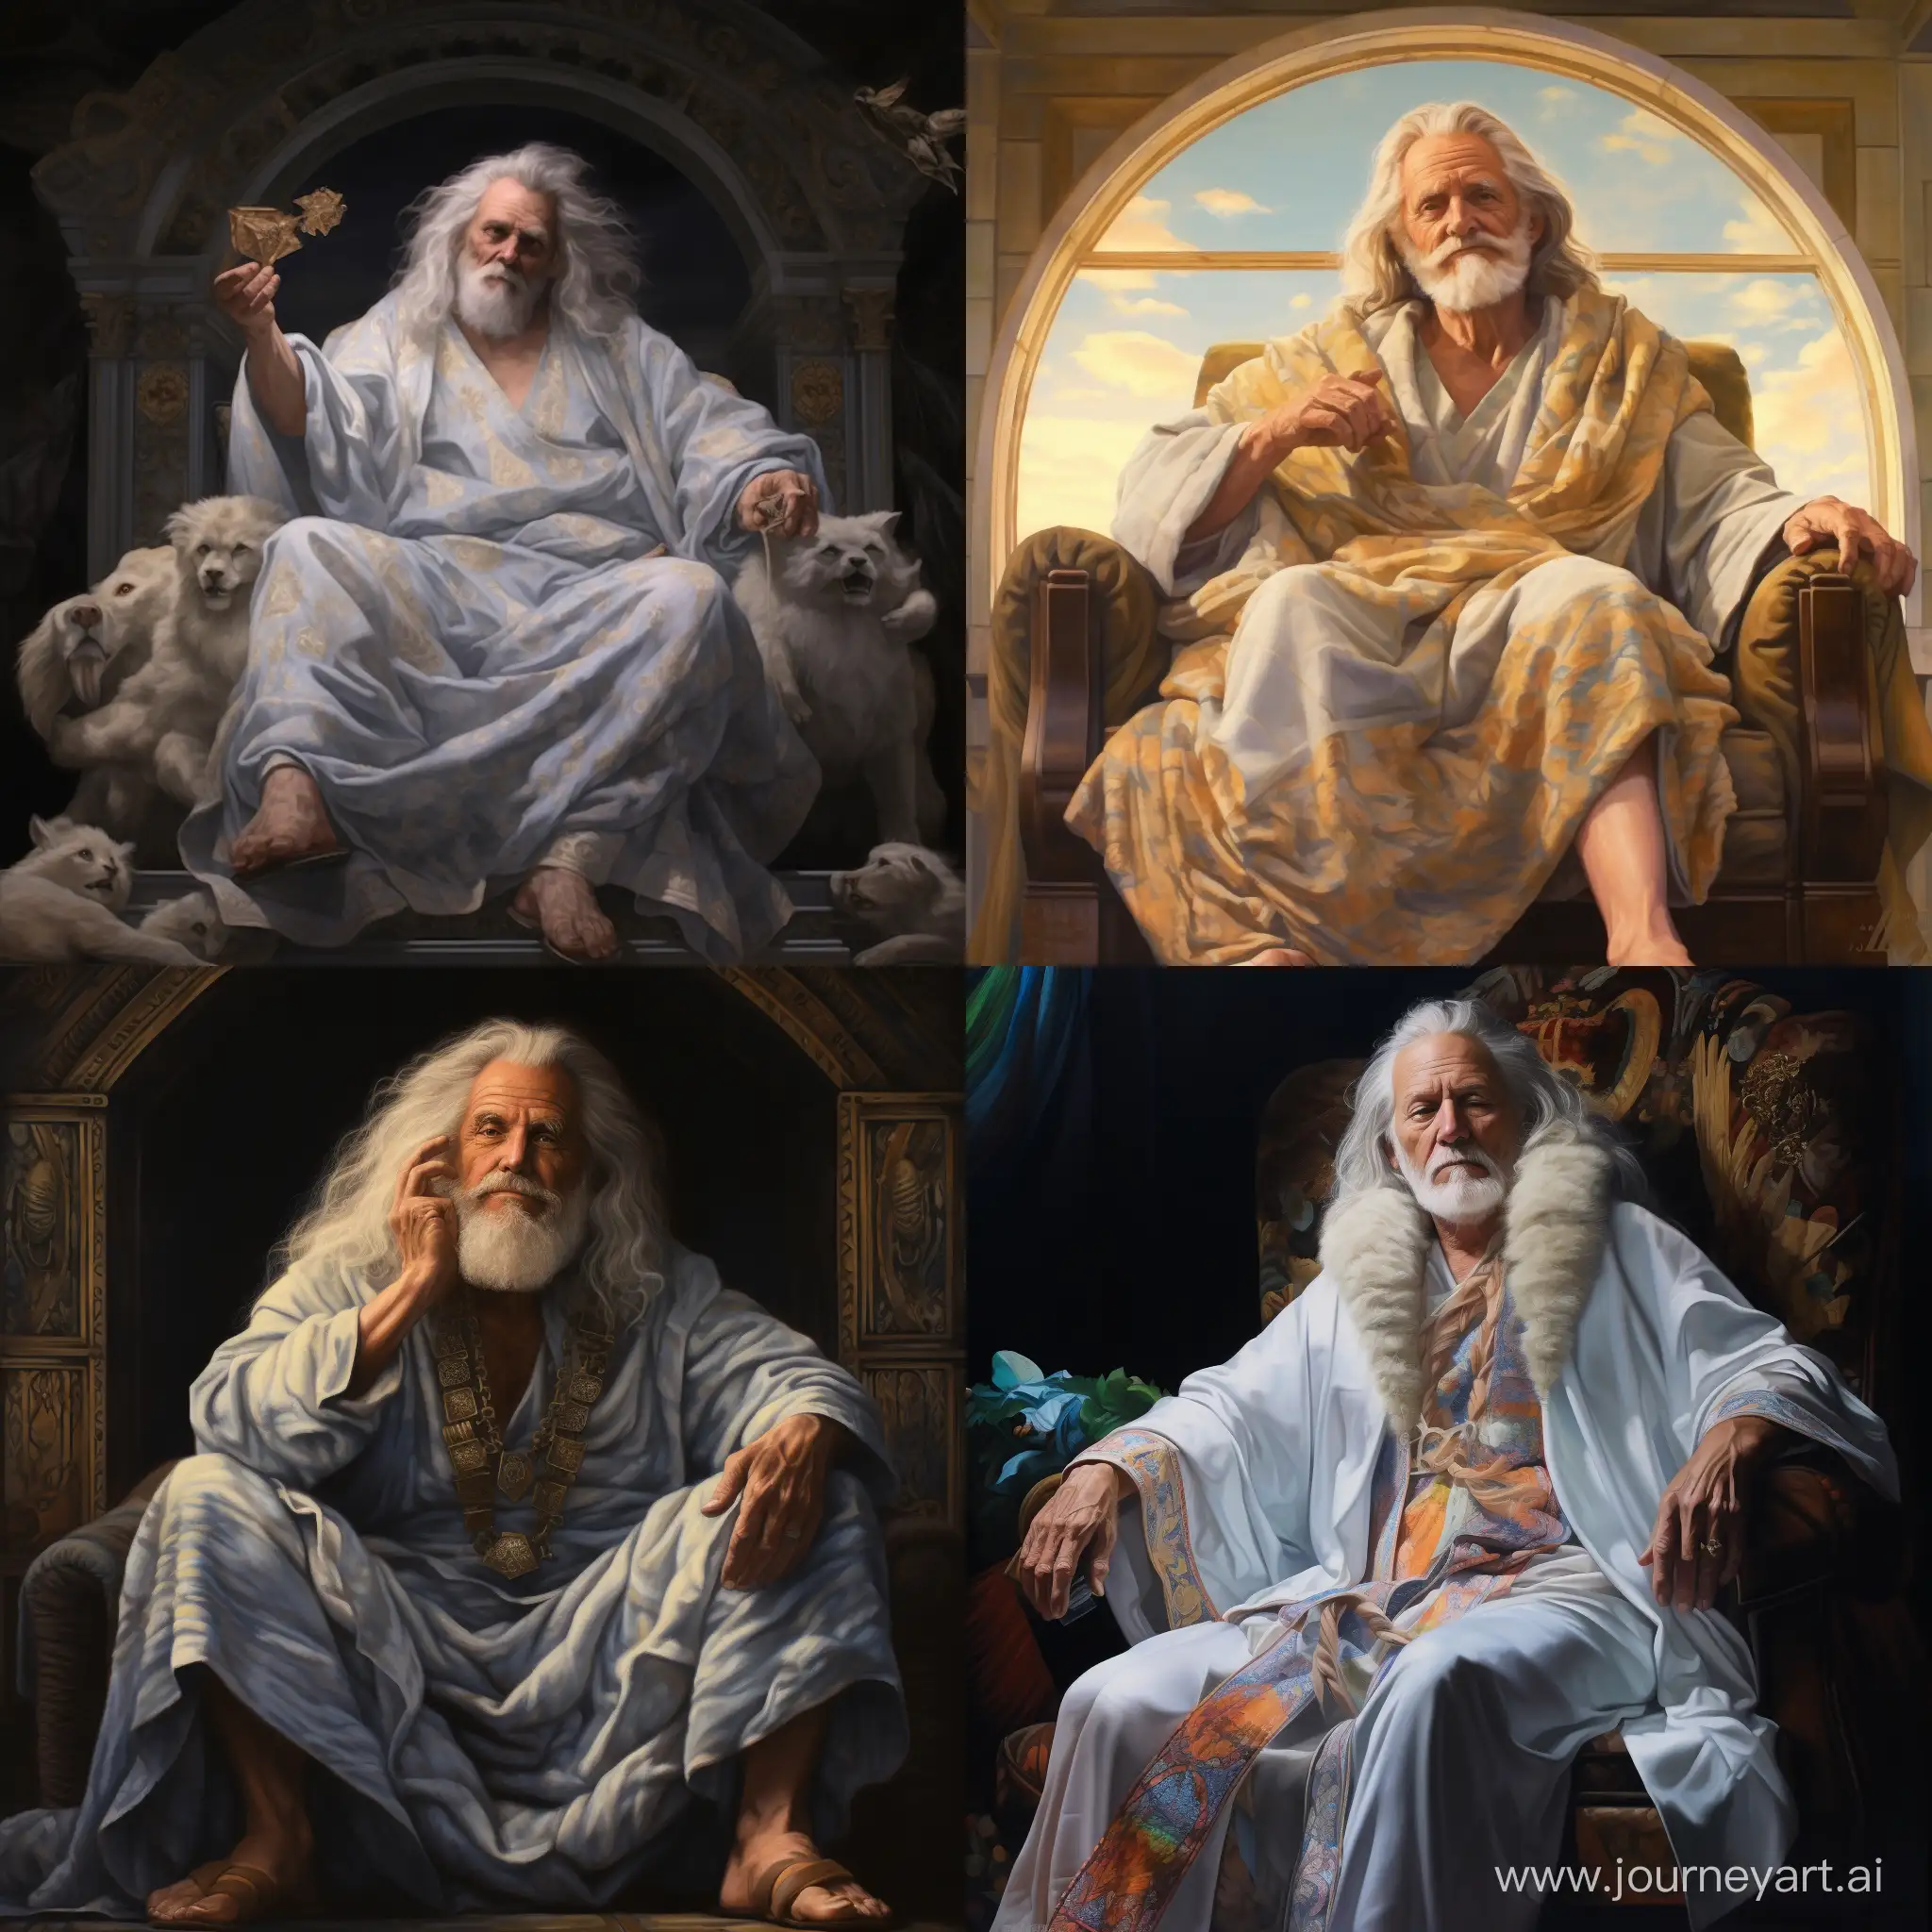 Playful-Aging-God-in-Robe-Slippers-and-Halo-Artistic-Depiction